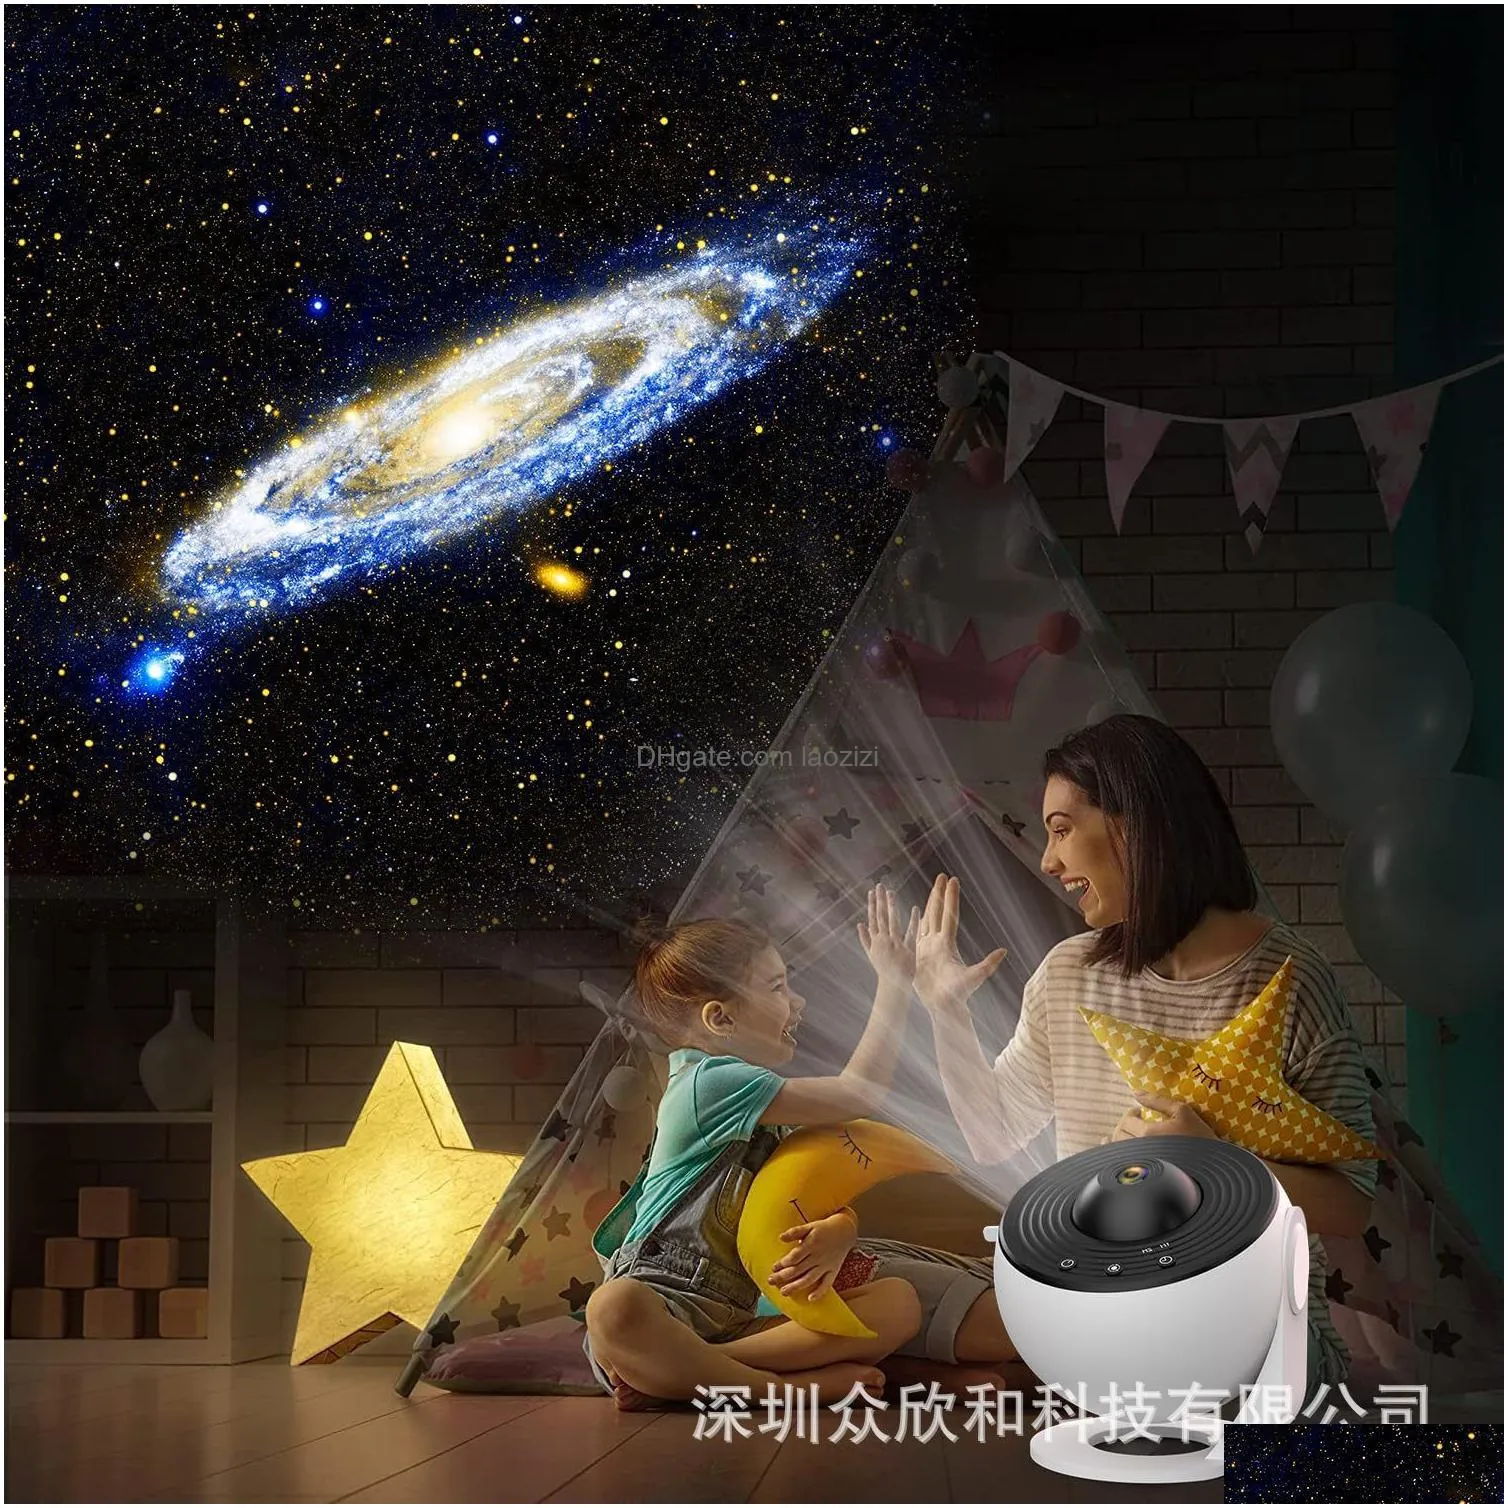 night light galaxy projector starry sky projector 360ﾰ rotate planetarium lamp for kids bedroom valentines day gift wedding deco lxl28